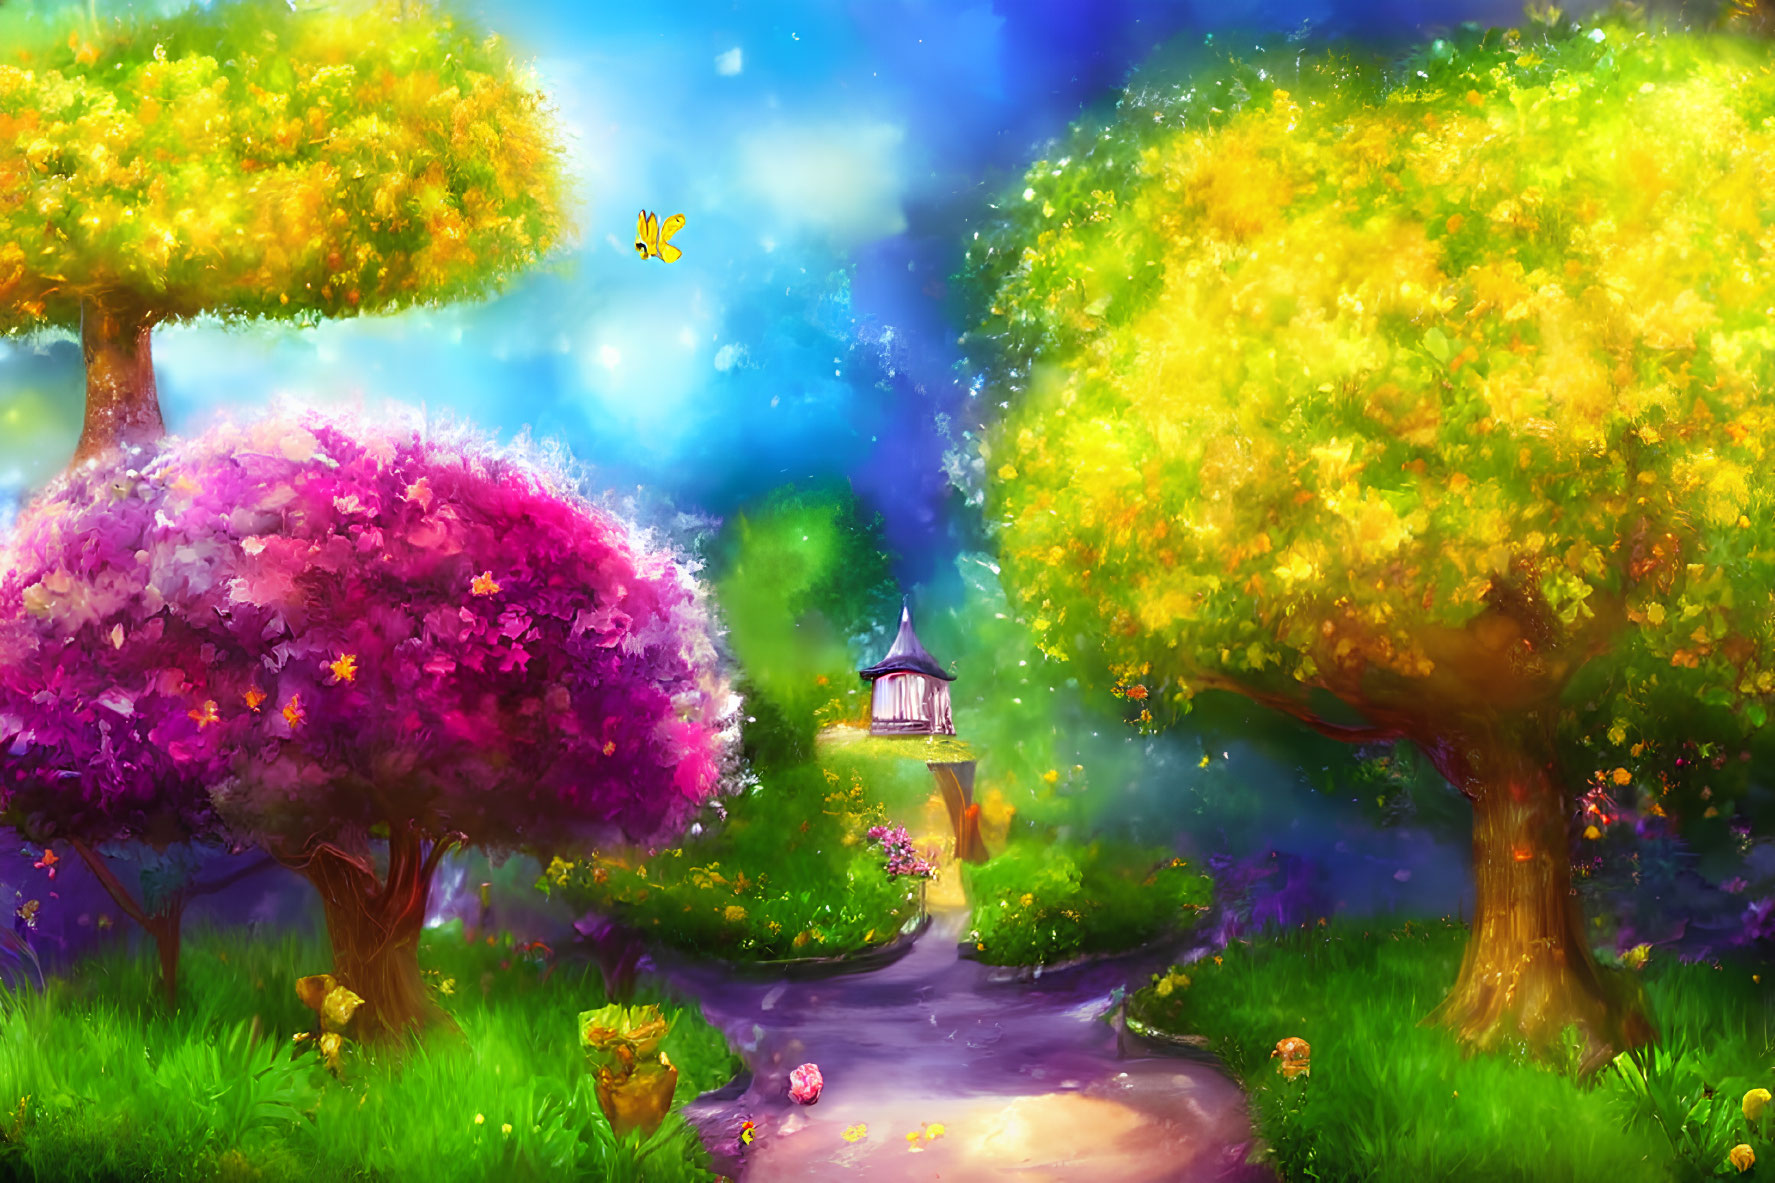 Colorful Fantasy Landscape with Trees, Path, Lantern, Butterfly, and Blue Sky